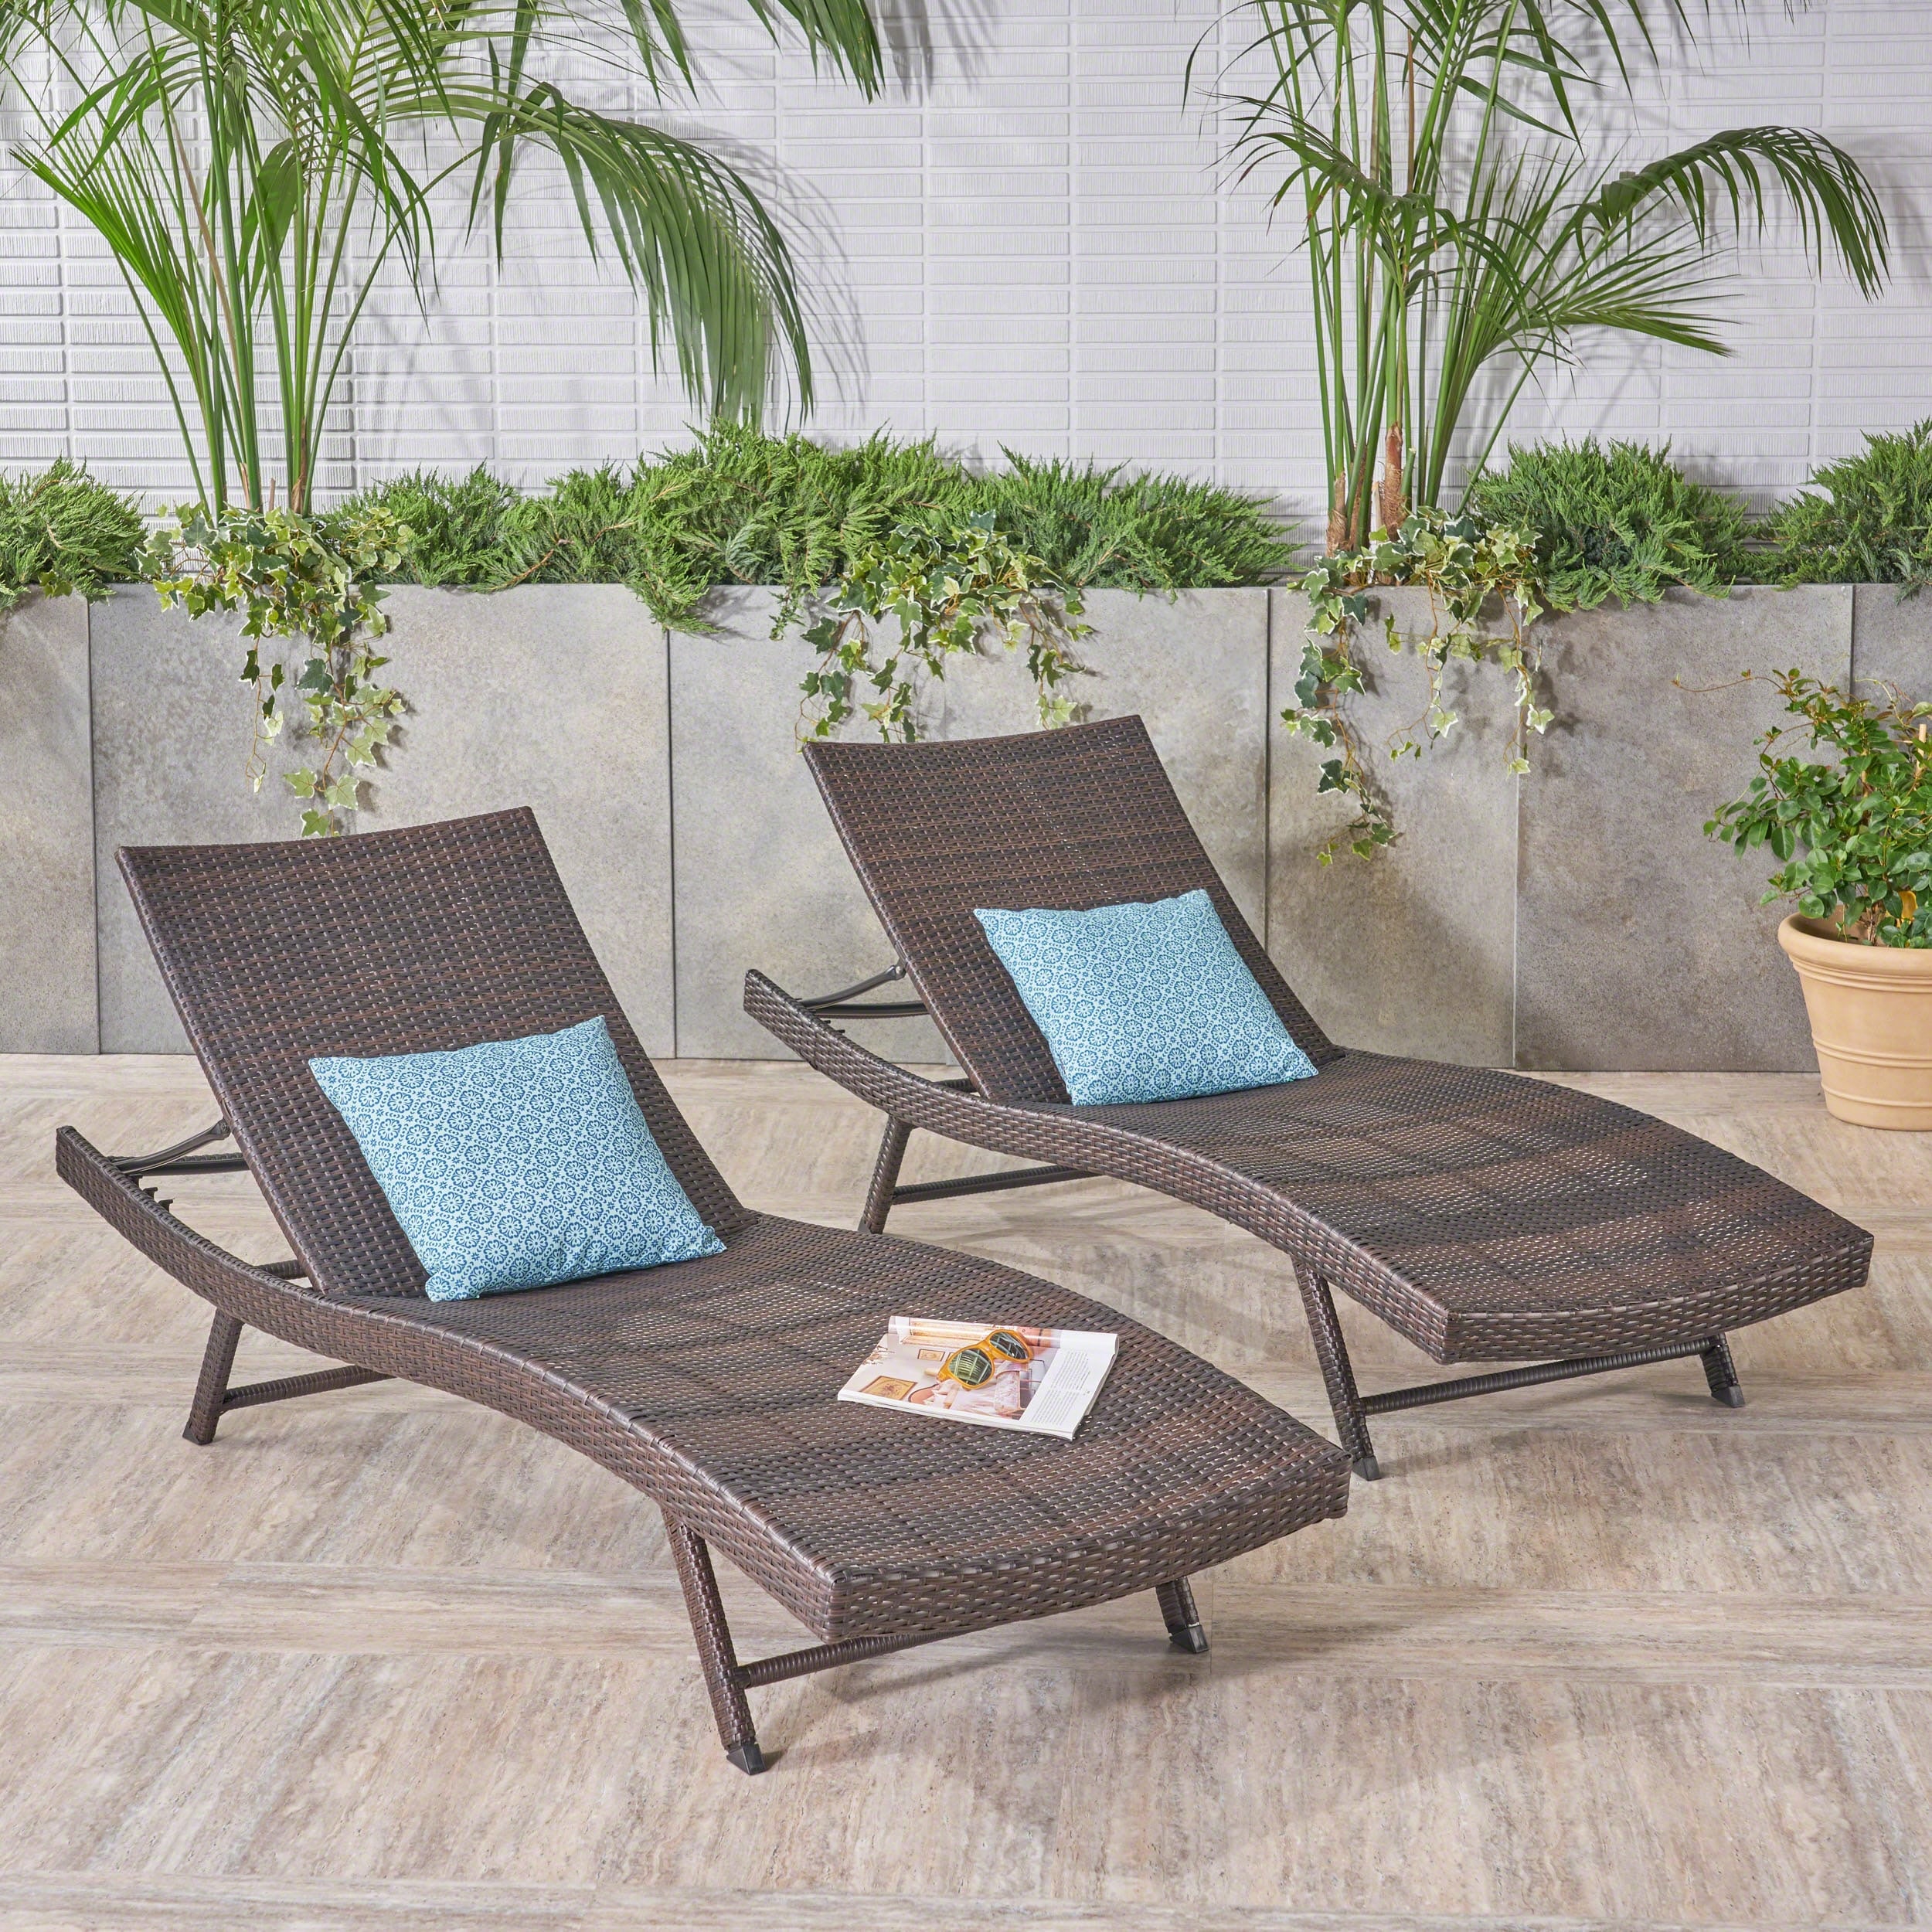 2 Set Outdoor Brown Wicker Adjustable Chaise Lounge Chair Brown